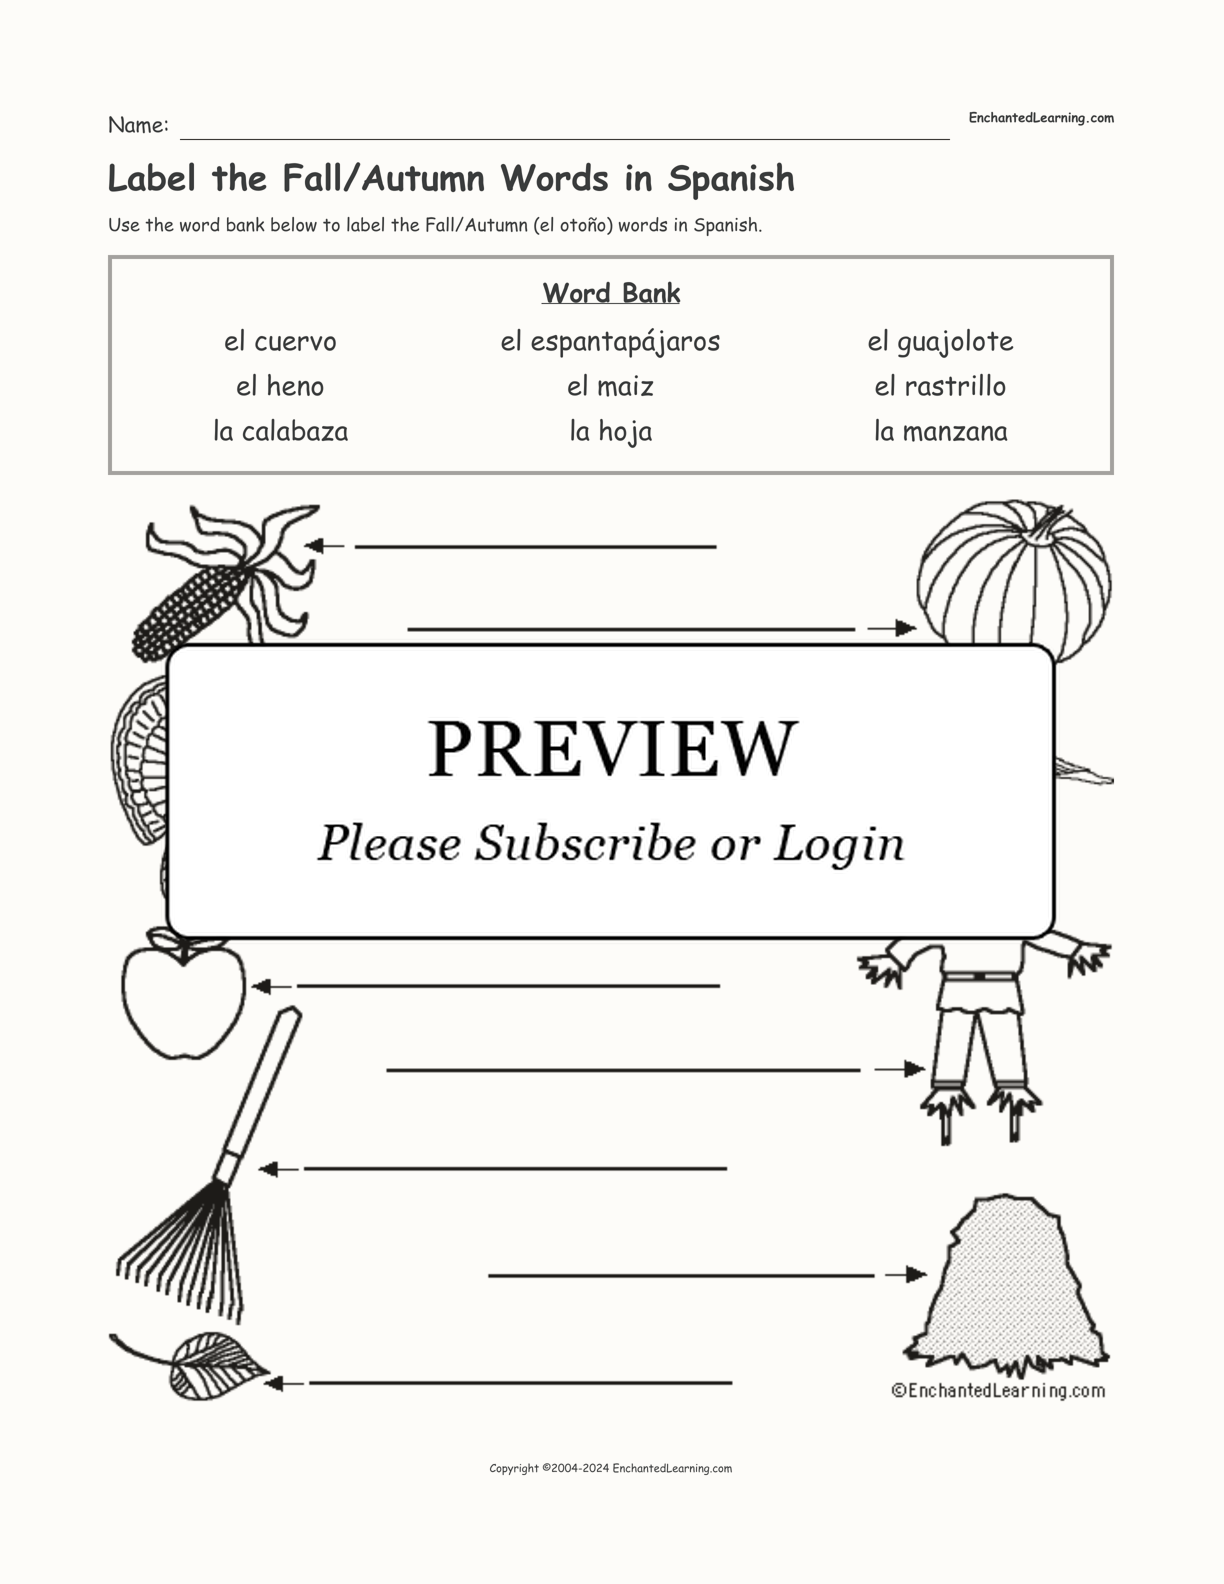 Label the Fall/Autumn Words in Spanish interactive worksheet page 1